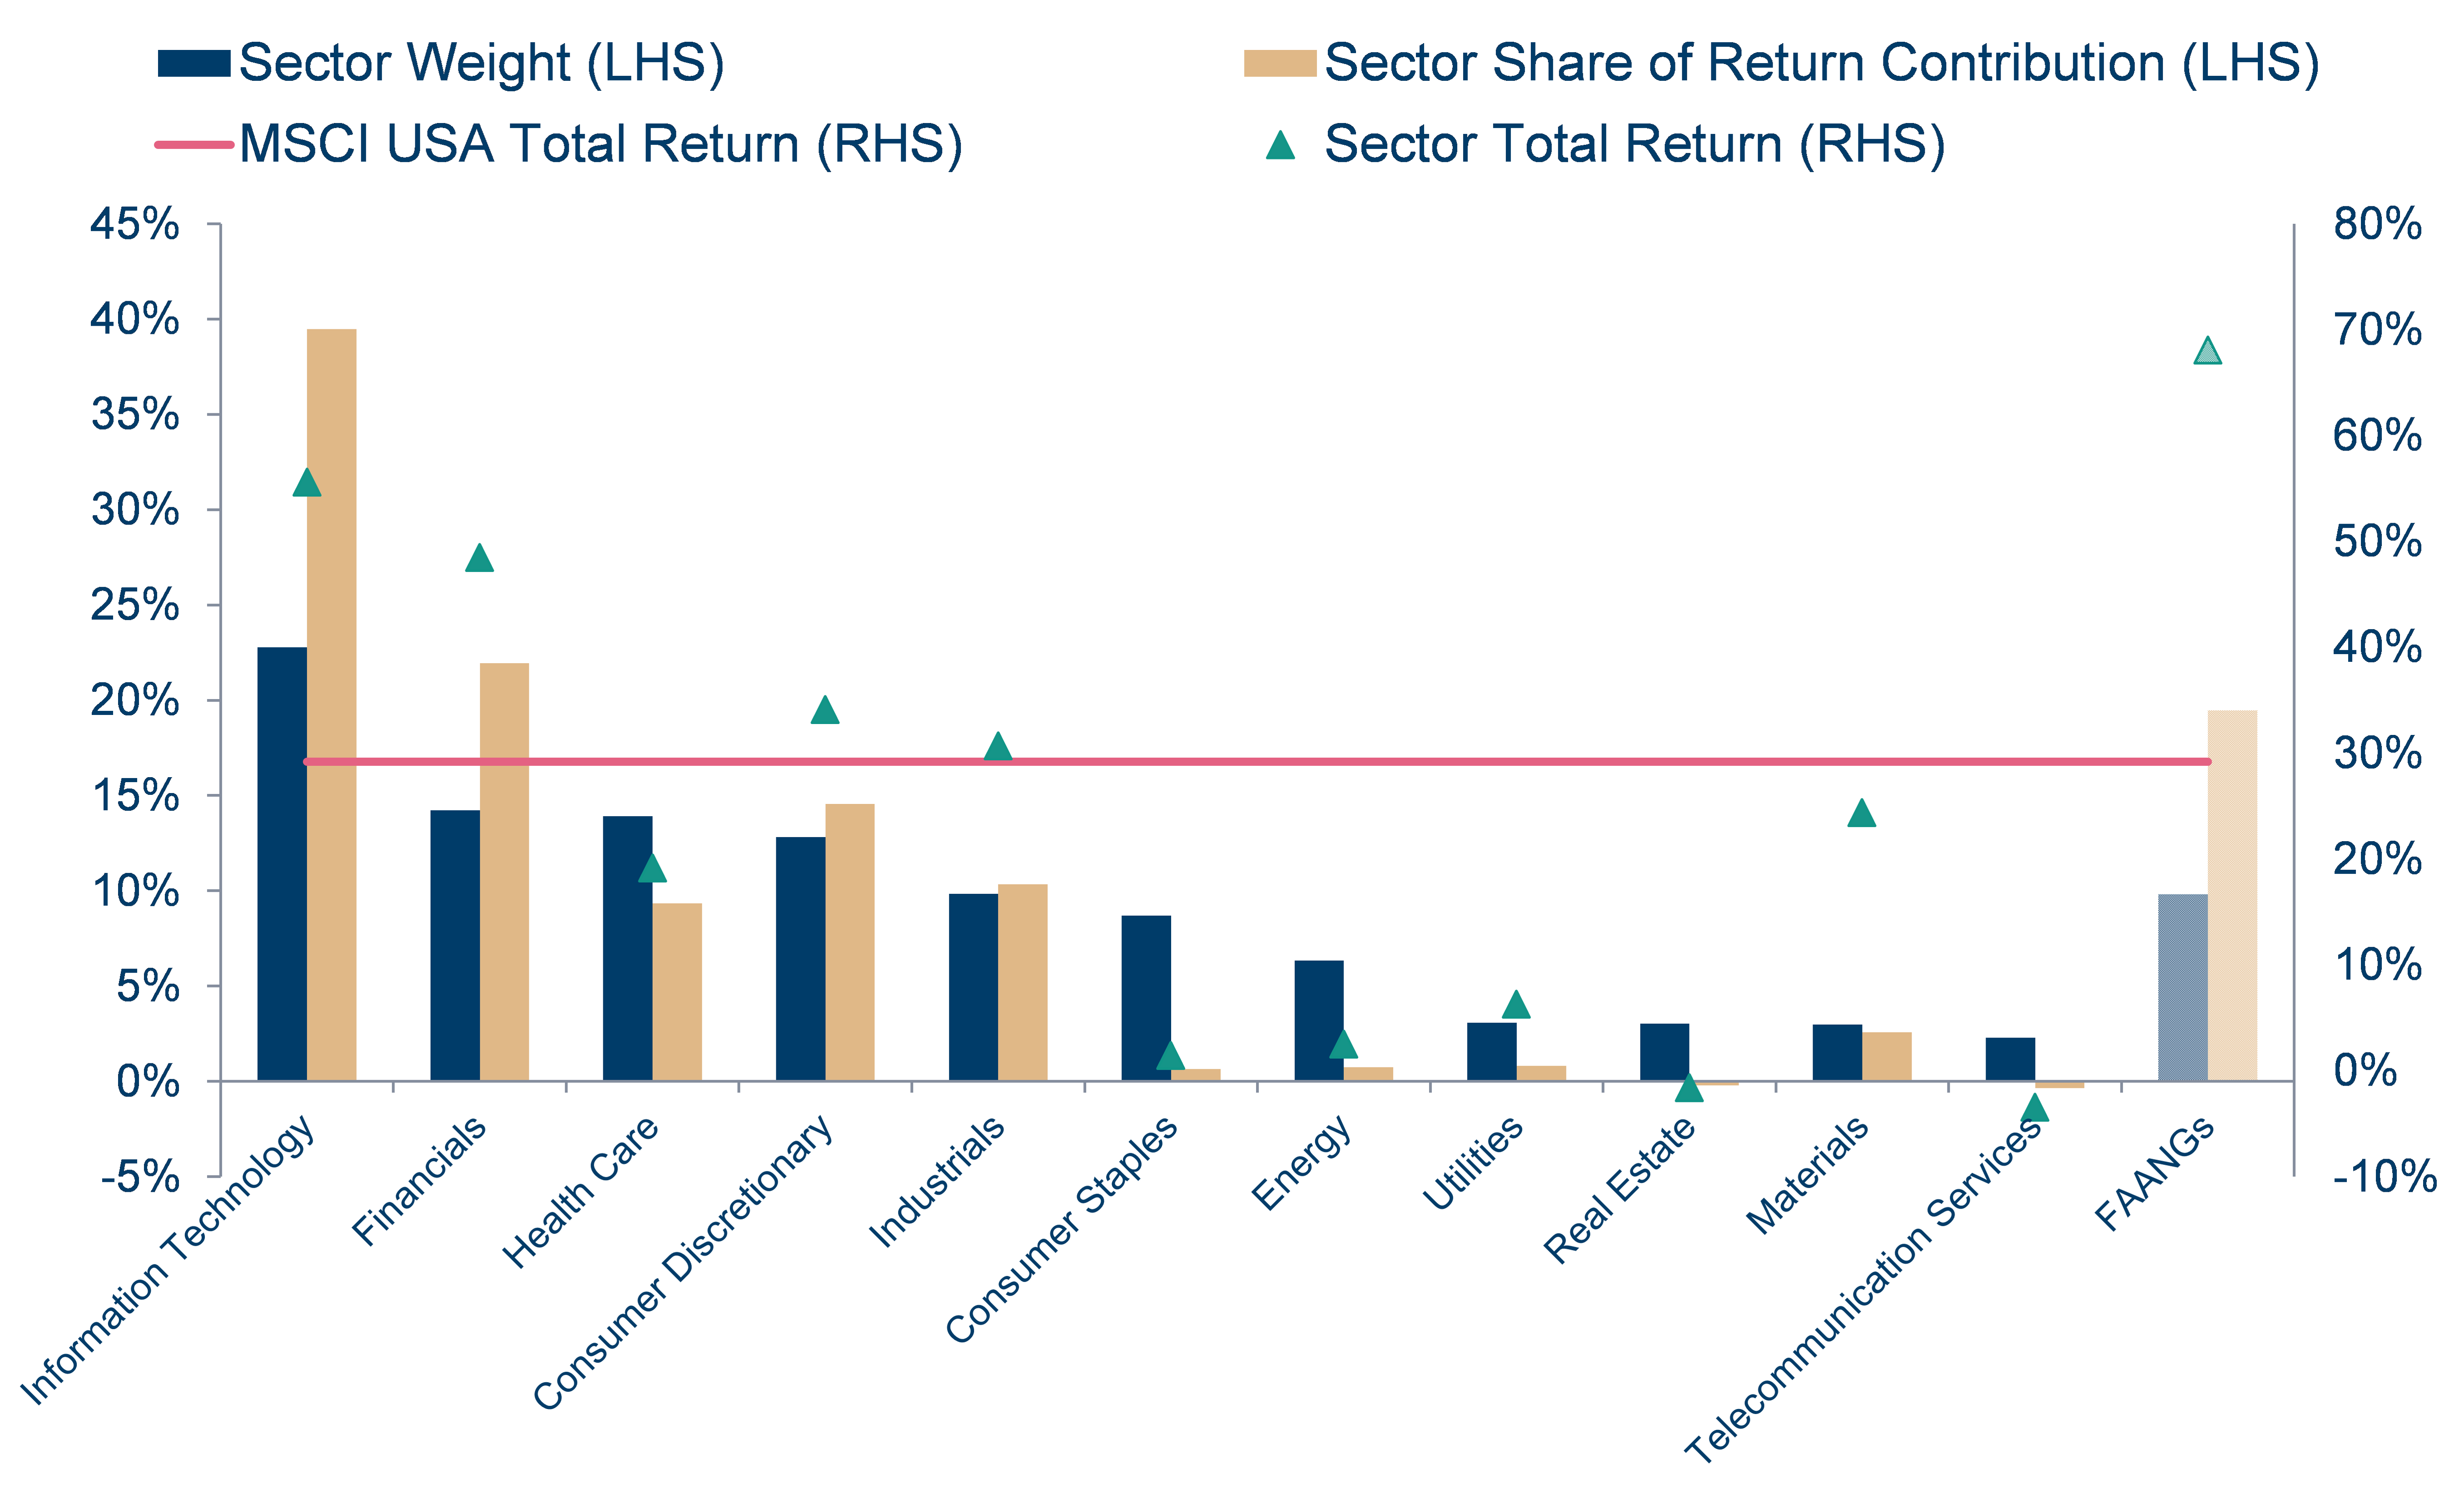 MSCI sector weights, contributions and total returns in a bar chart